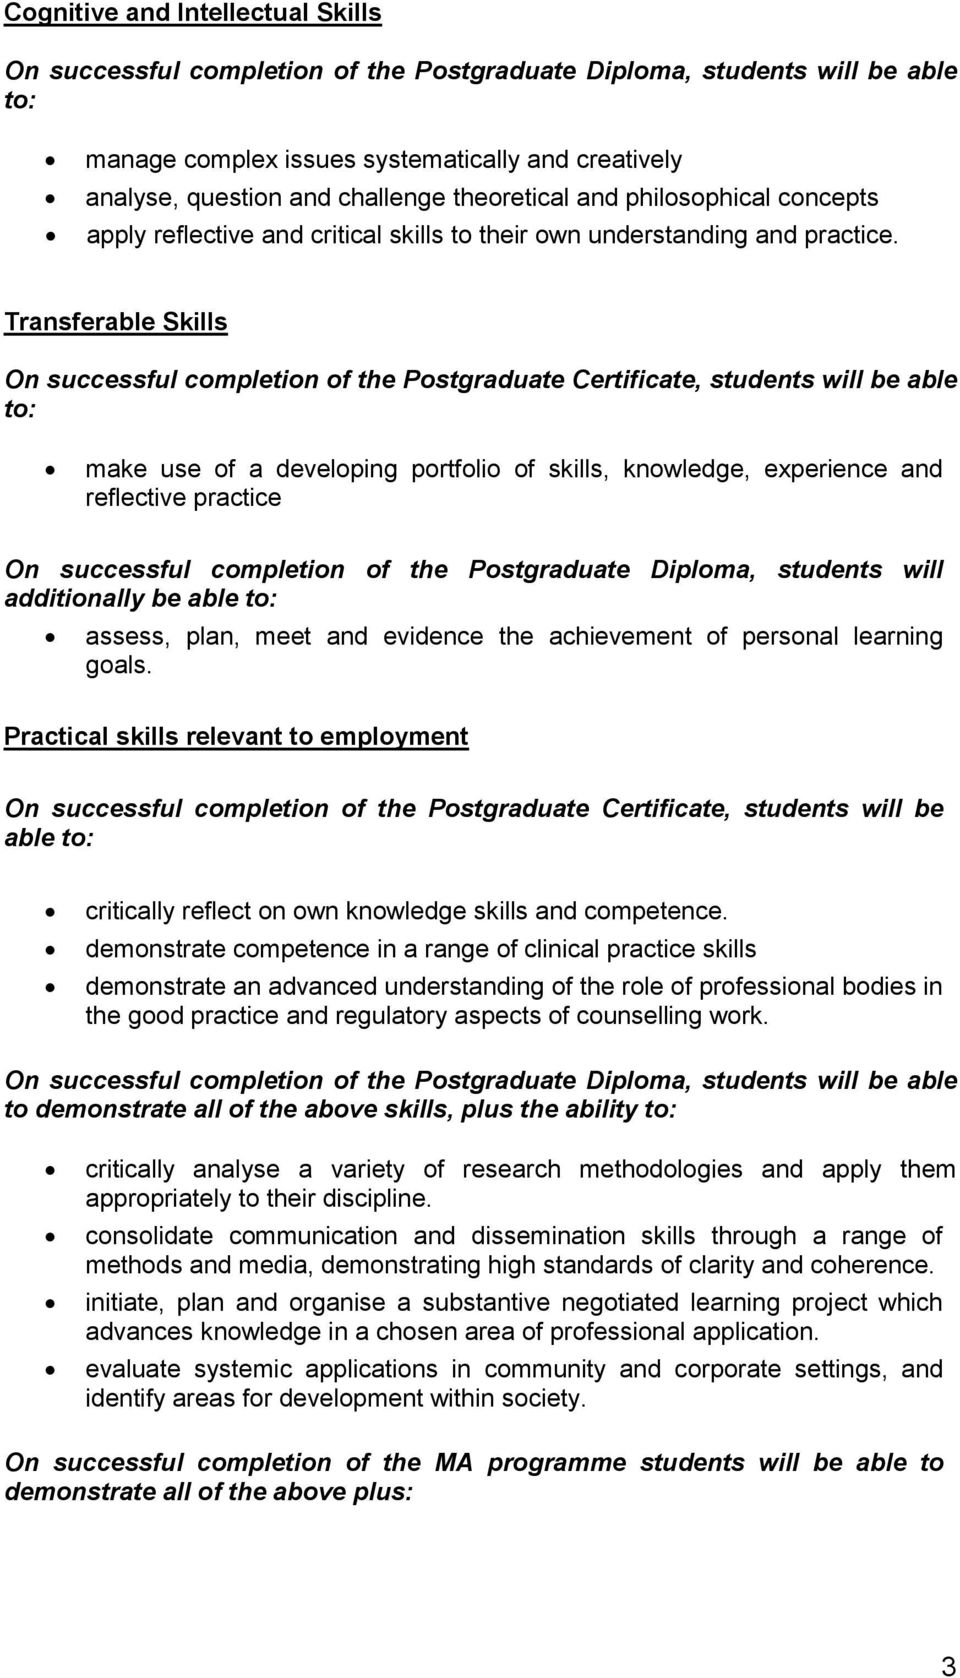 Transferable Skills On successful completion of the Postgraduate Certificate, students will be able to: make use of a developing portfolio of skills, knowledge, experience and reflective practice On